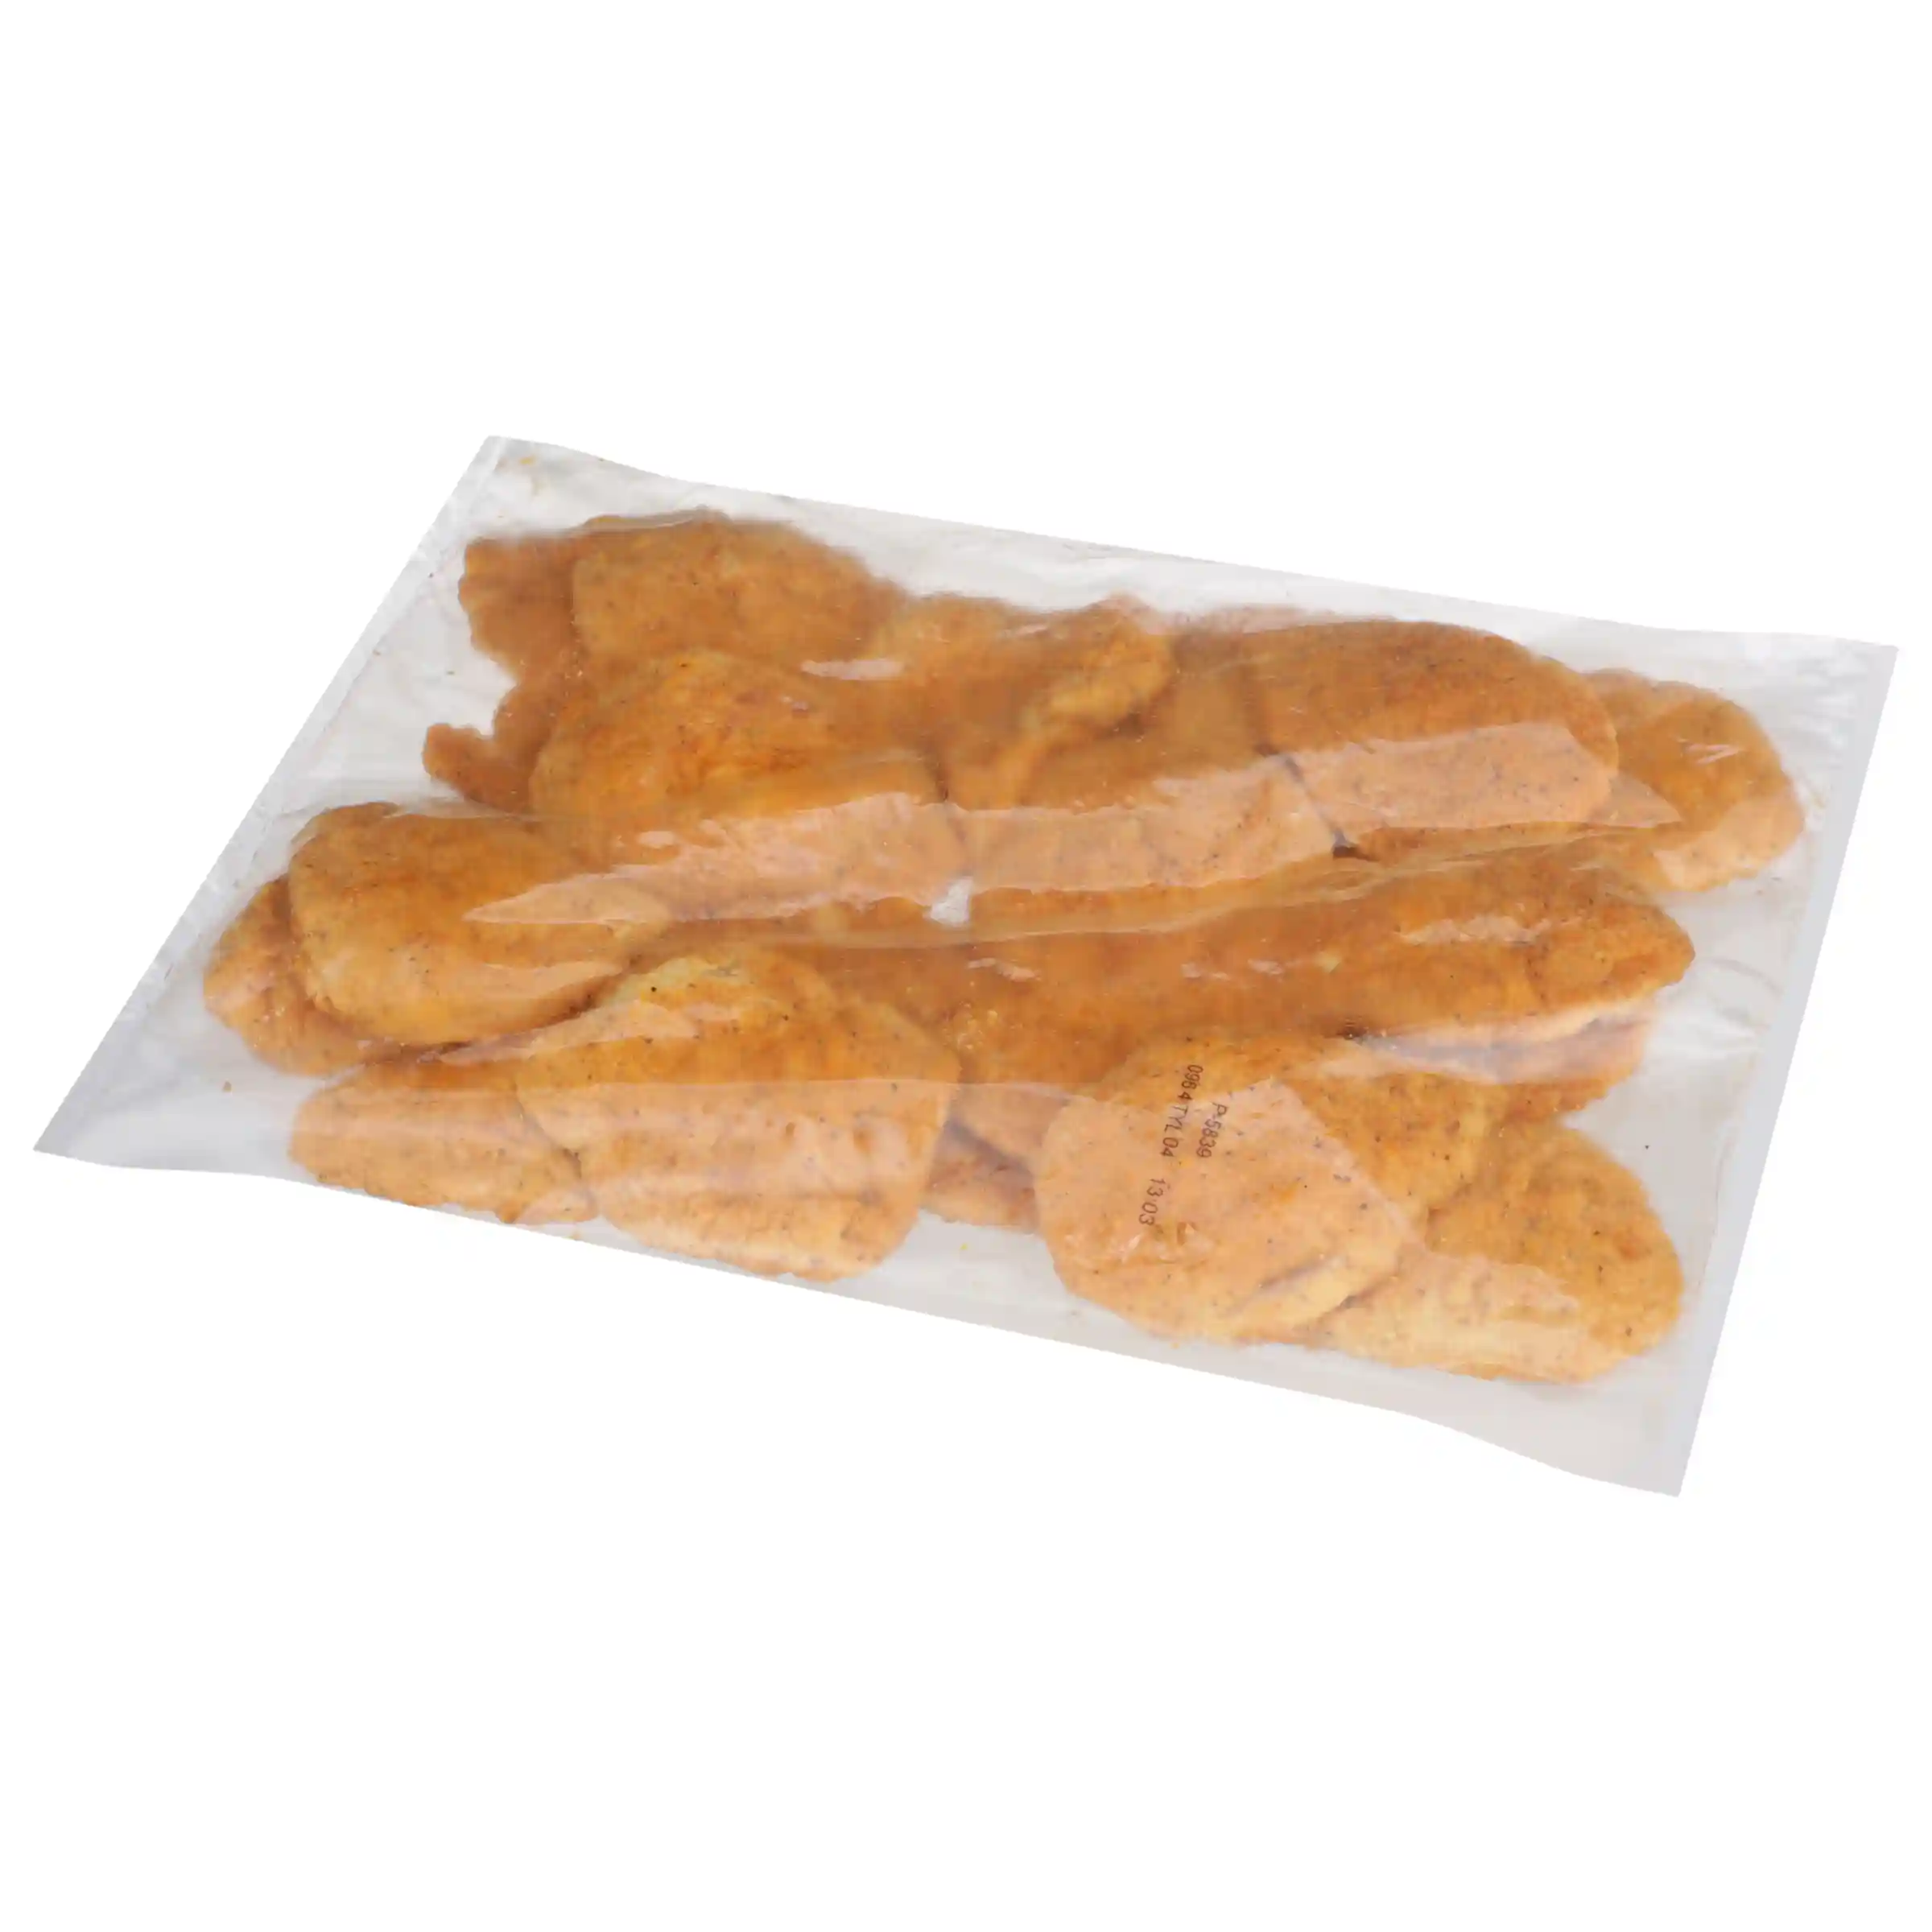 Tyson Red Label® Uncooked Hot & Spicy Select Cut Chicken Breast Filet Fritters, 4 oz. _image_21